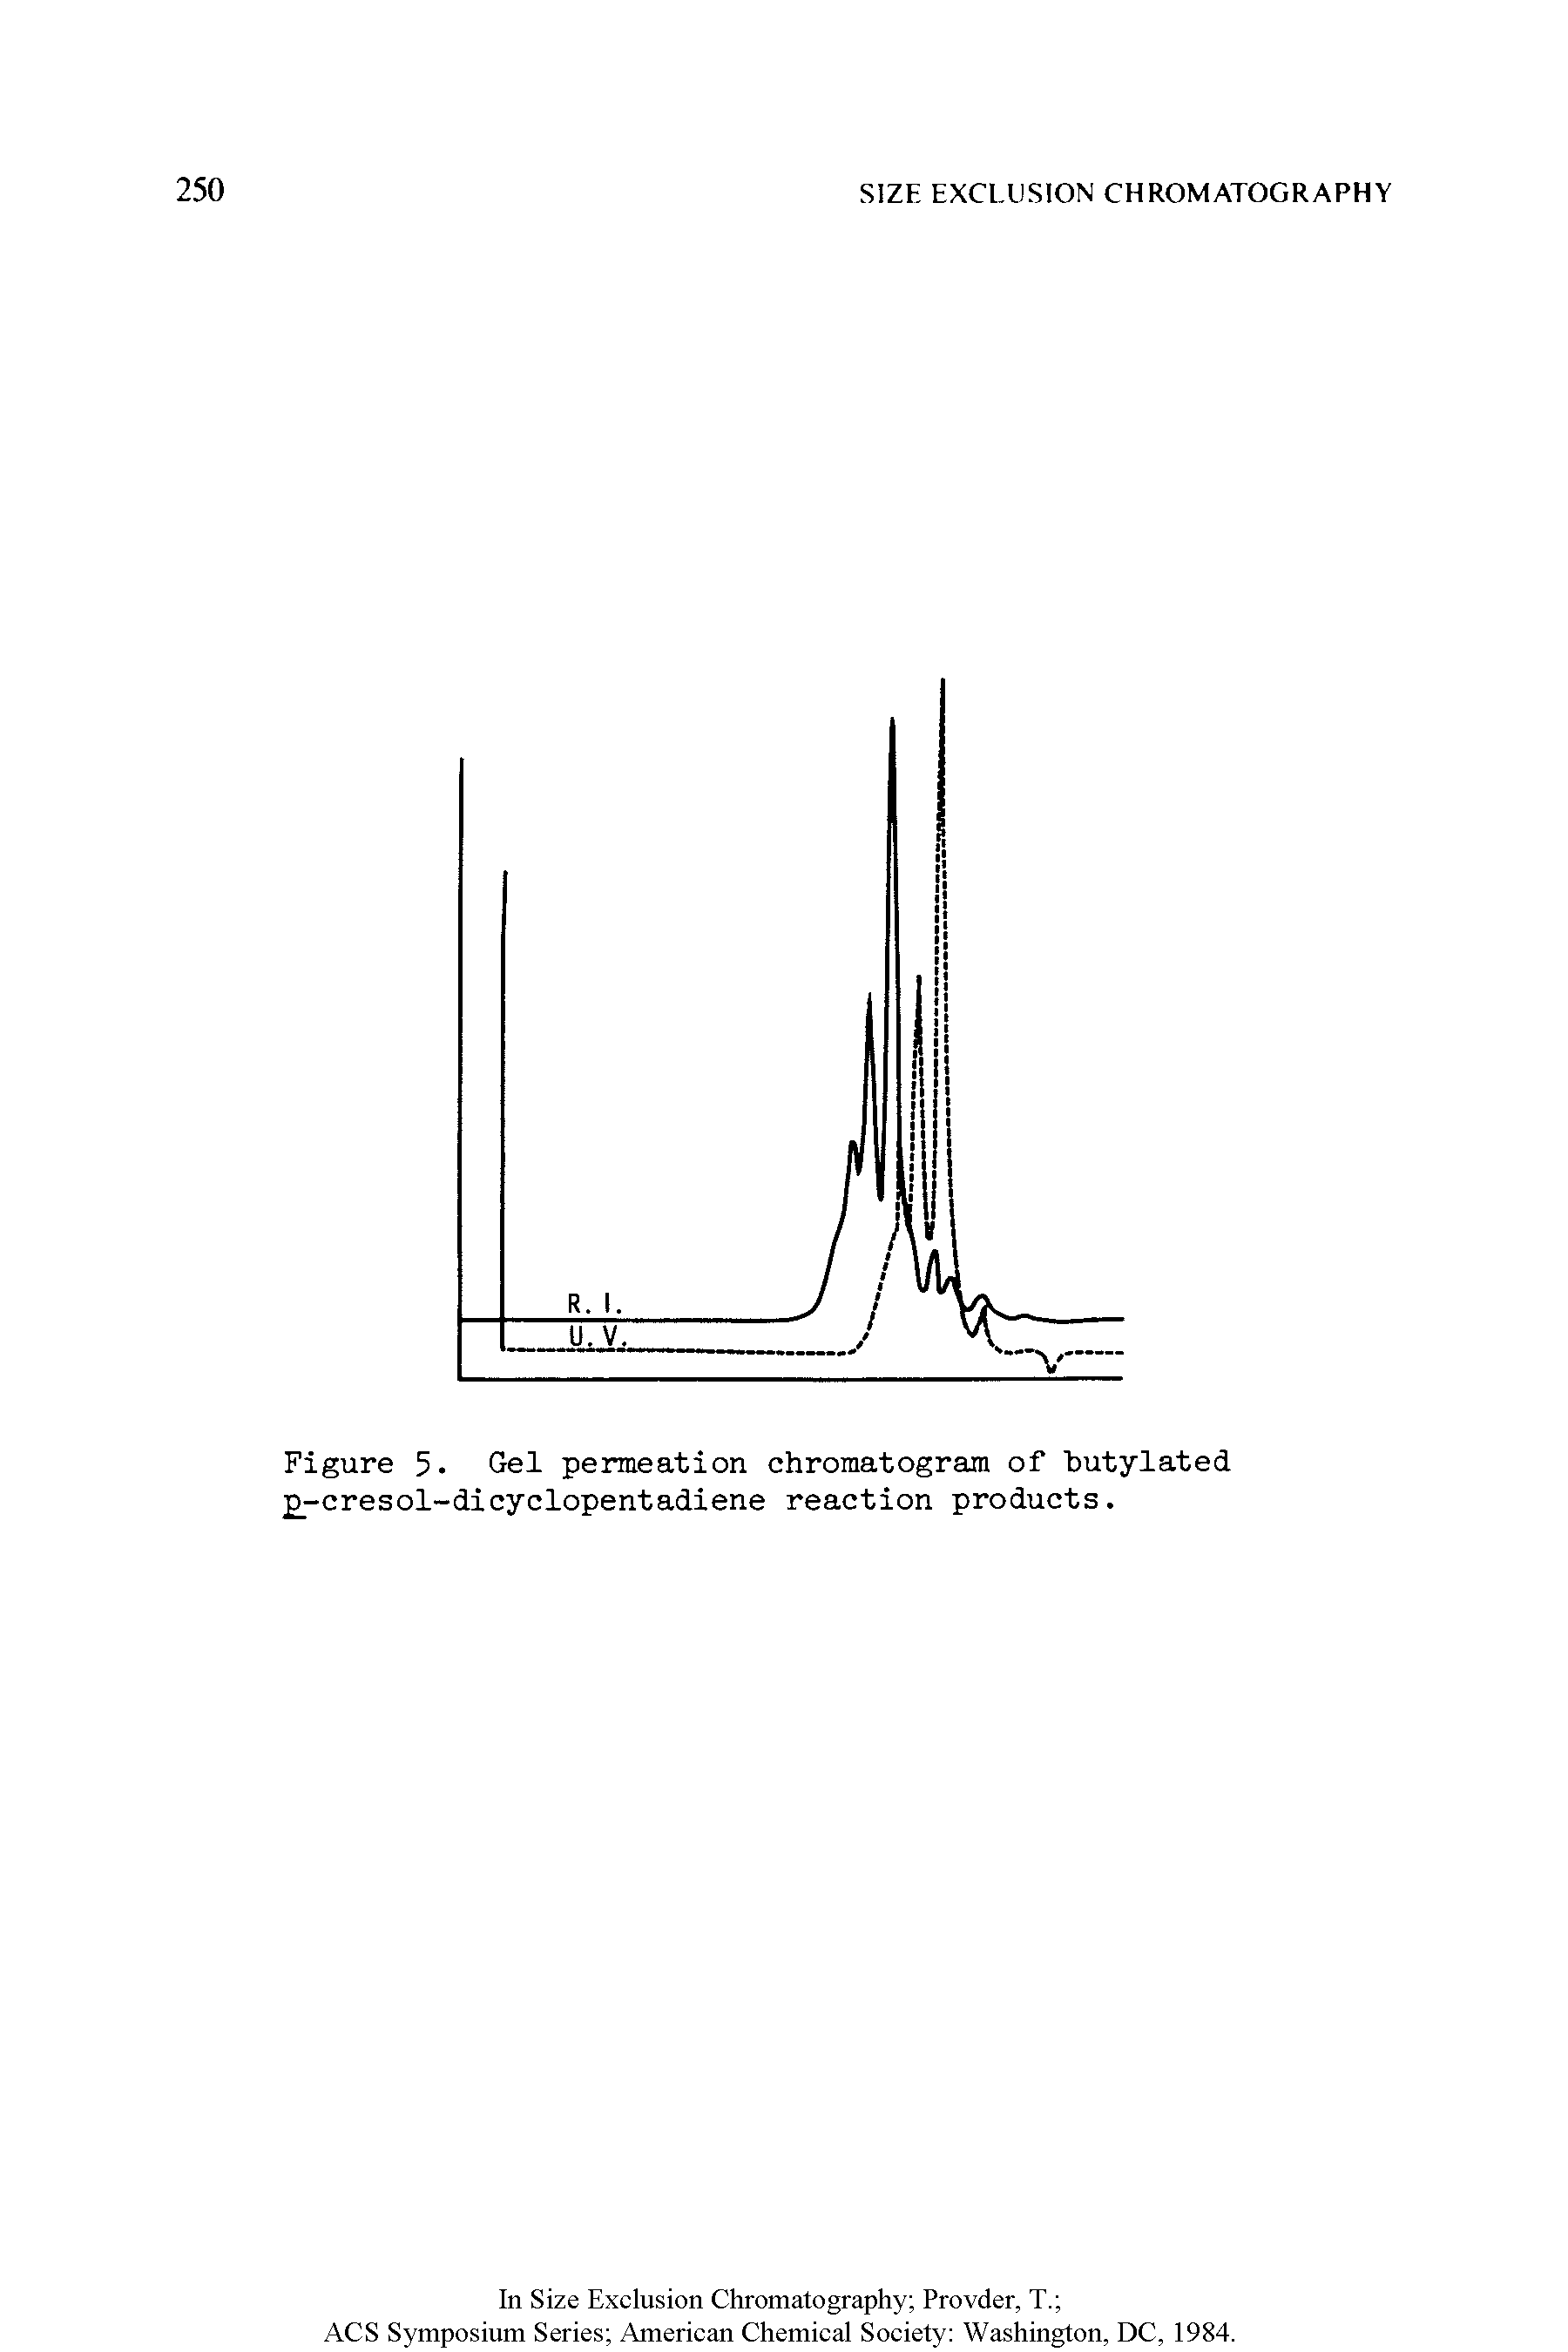 Figure 5- Gel permeation chromatogram of butylated -cresol-dicyclopentadiene reaction products.